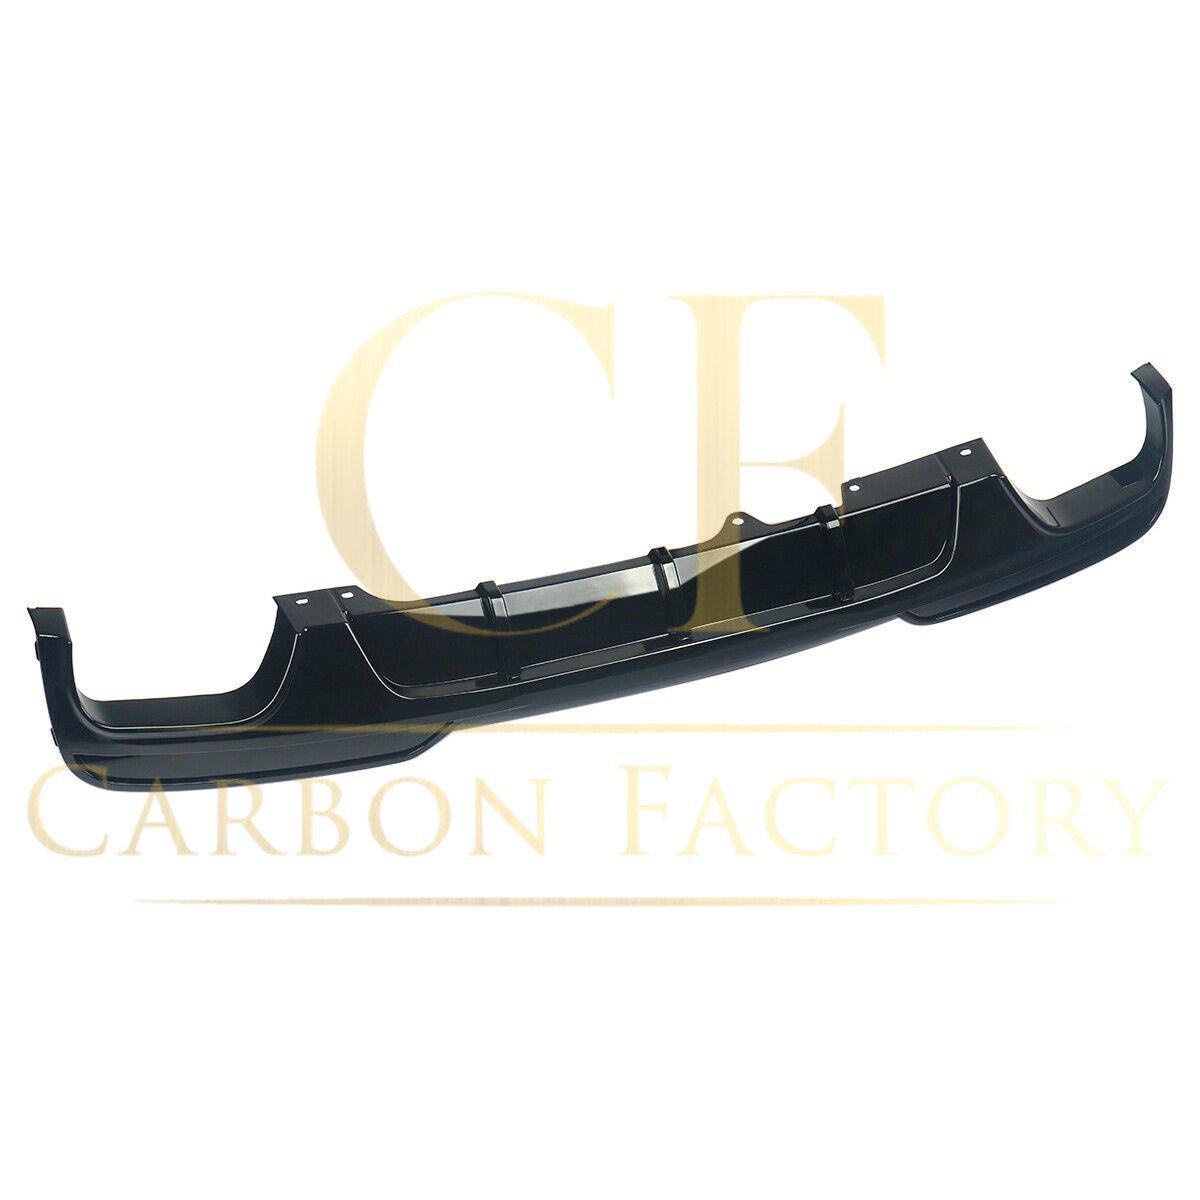 BMW F10 5 Series Gloss Black M Performance Style Rear Diffuser Quad Exhaust 10-17-Carbon Factory